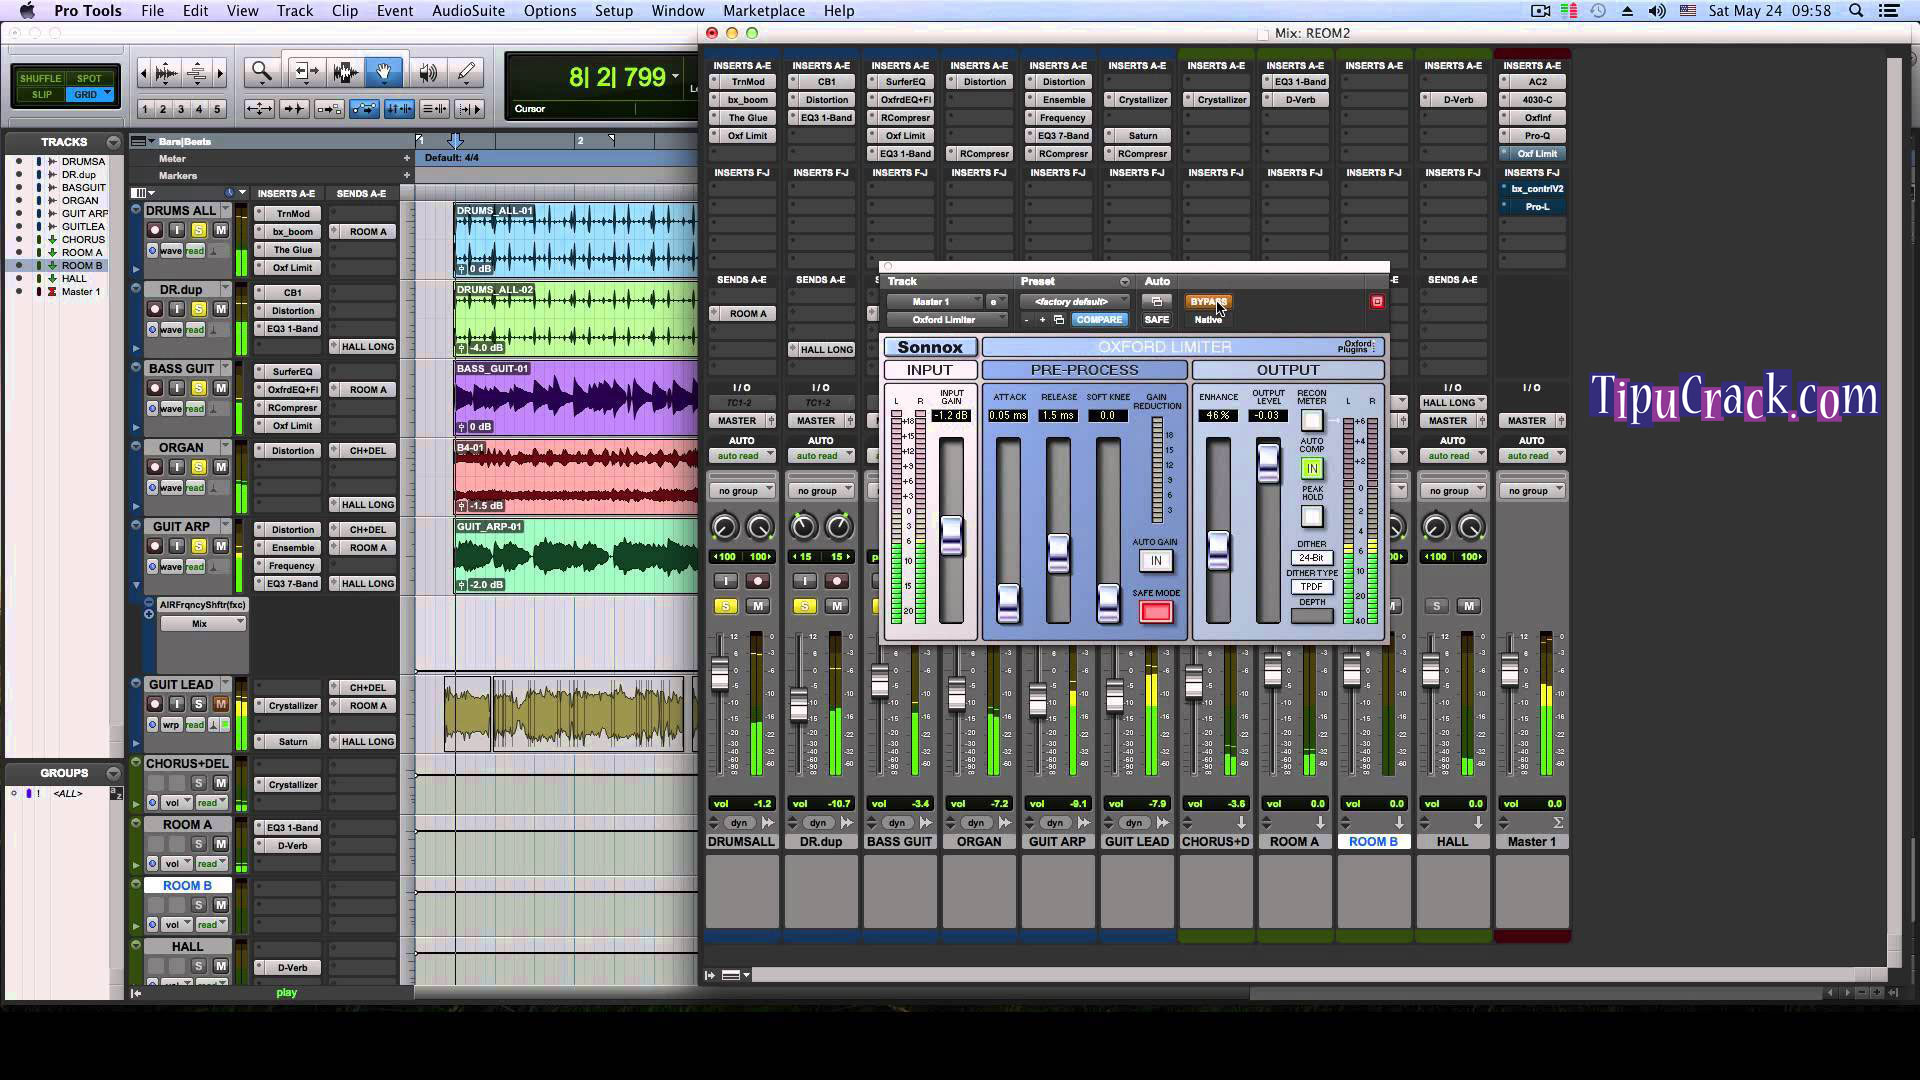 Pro tools 11 patch download